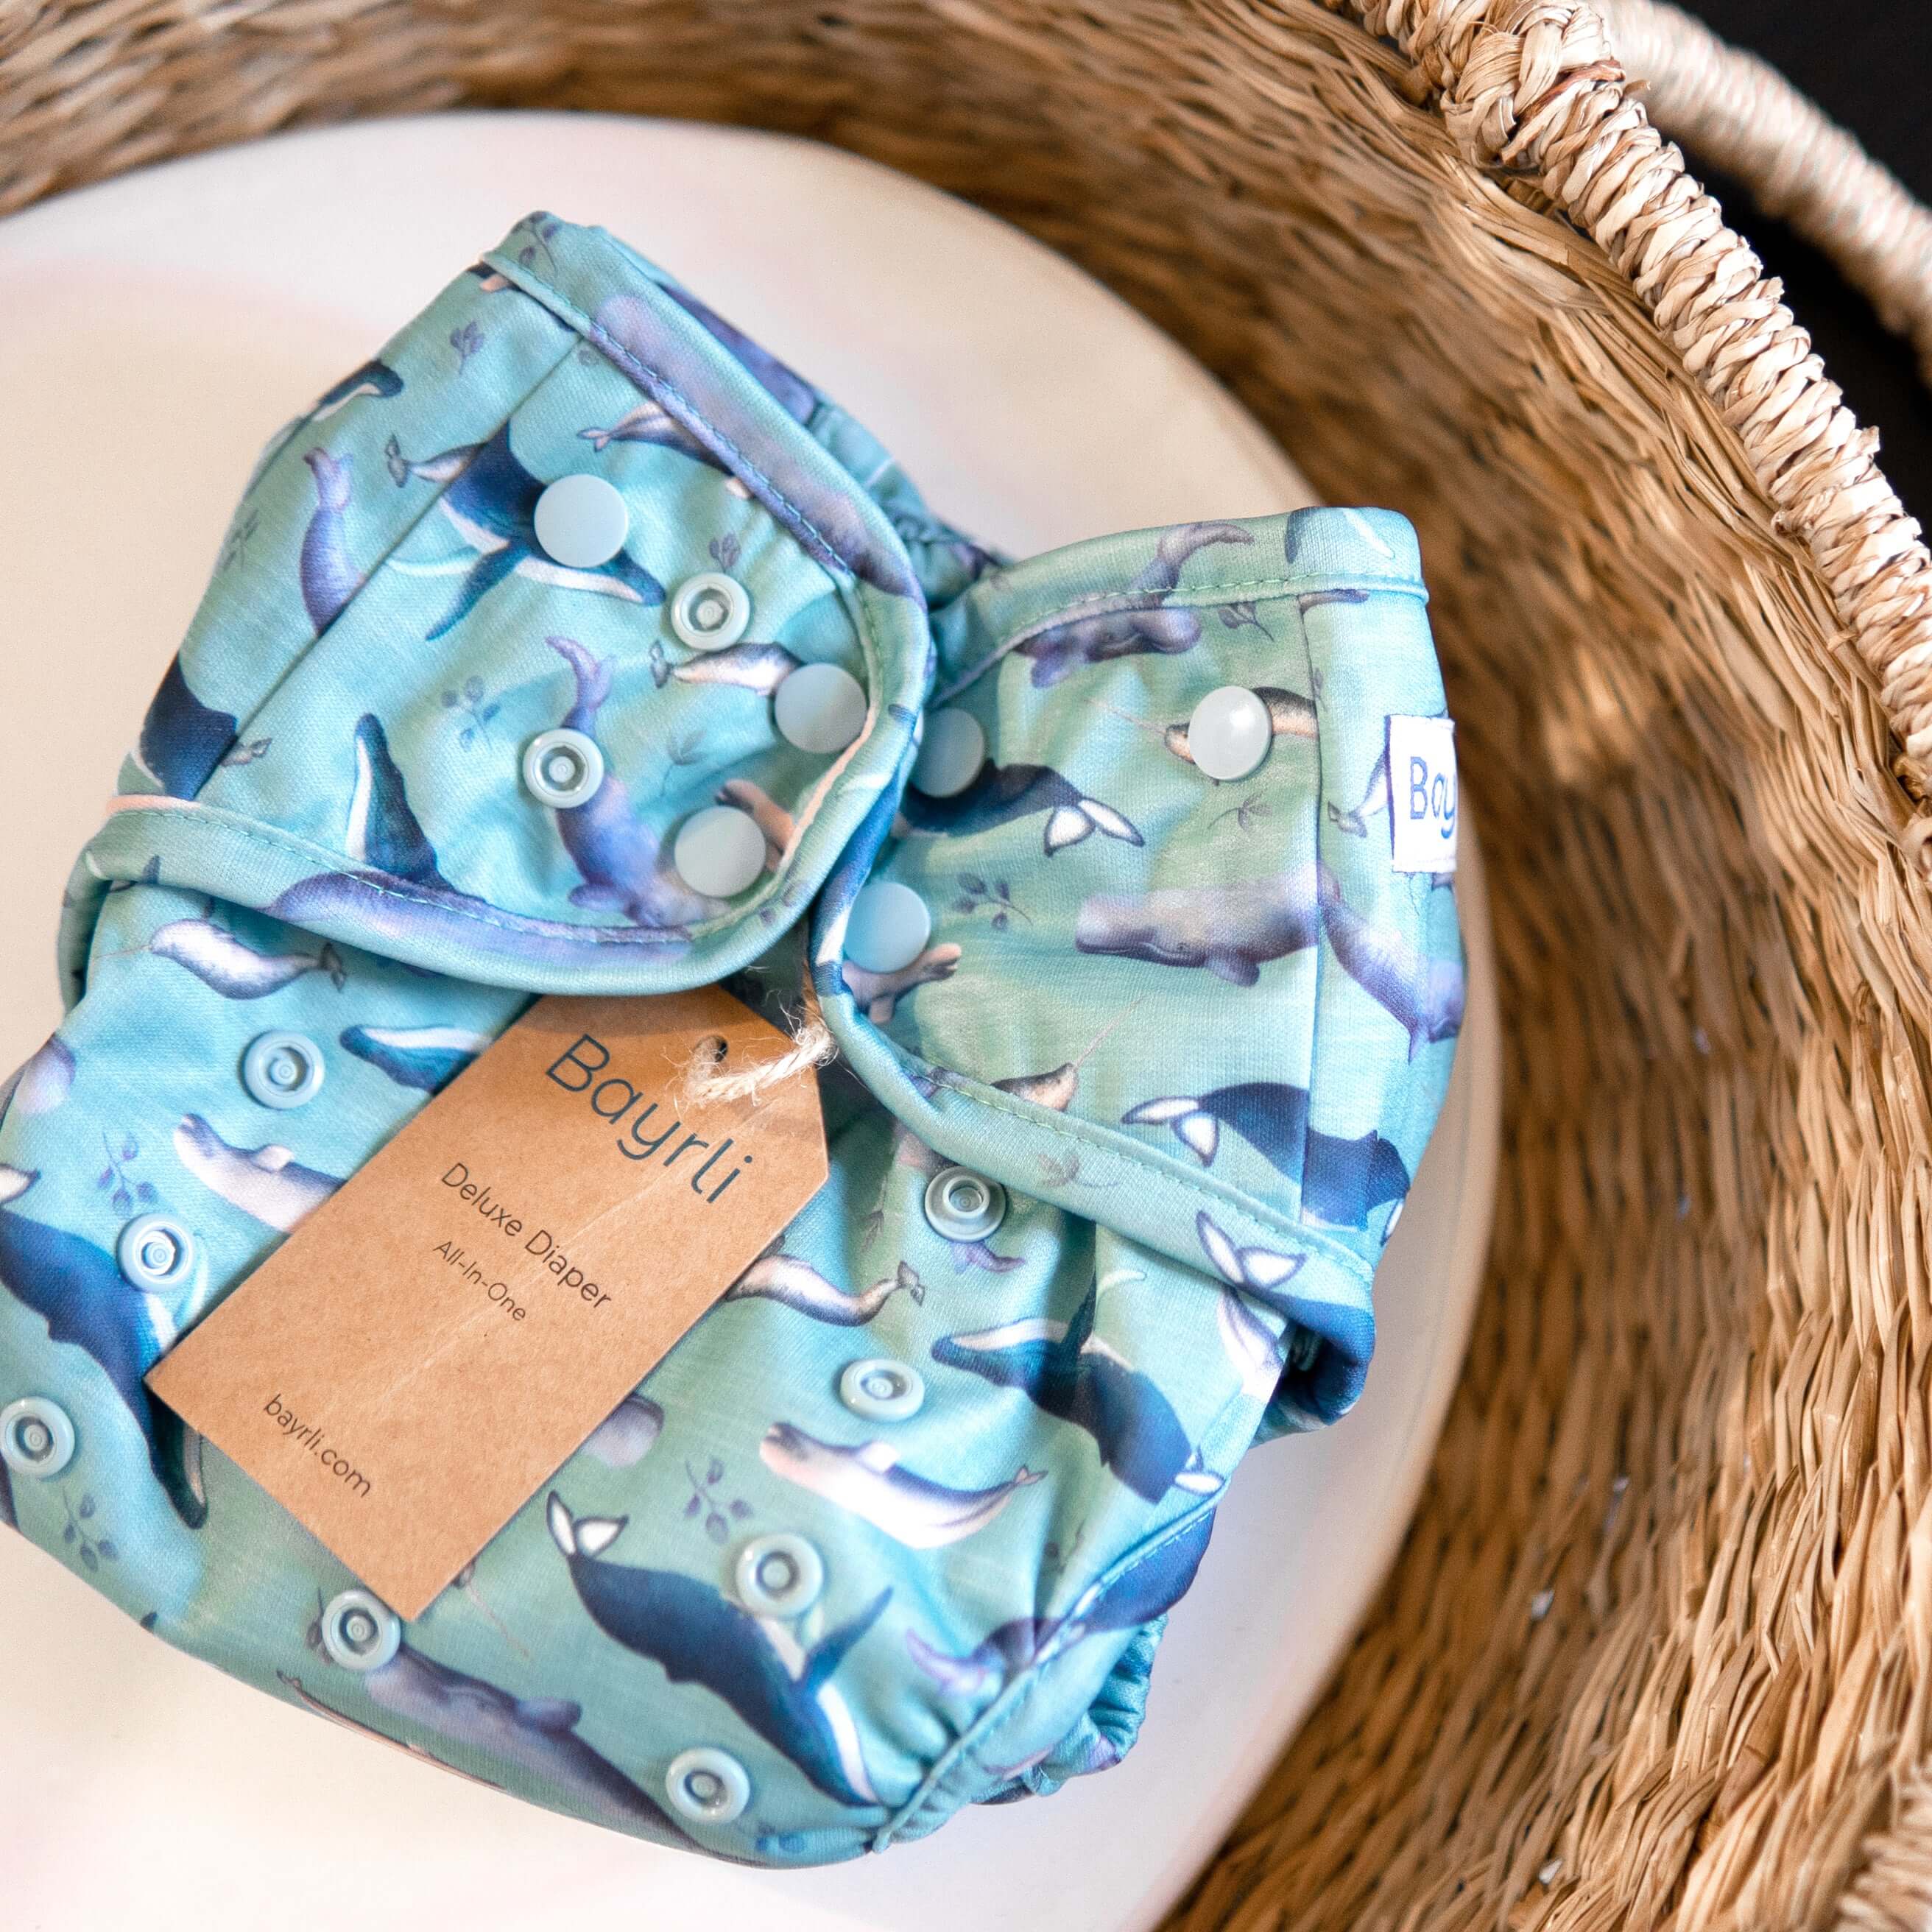 Bayrli®What is PUL and TPU fabric? Why did we choose TPU for our reusable diapers and period pads